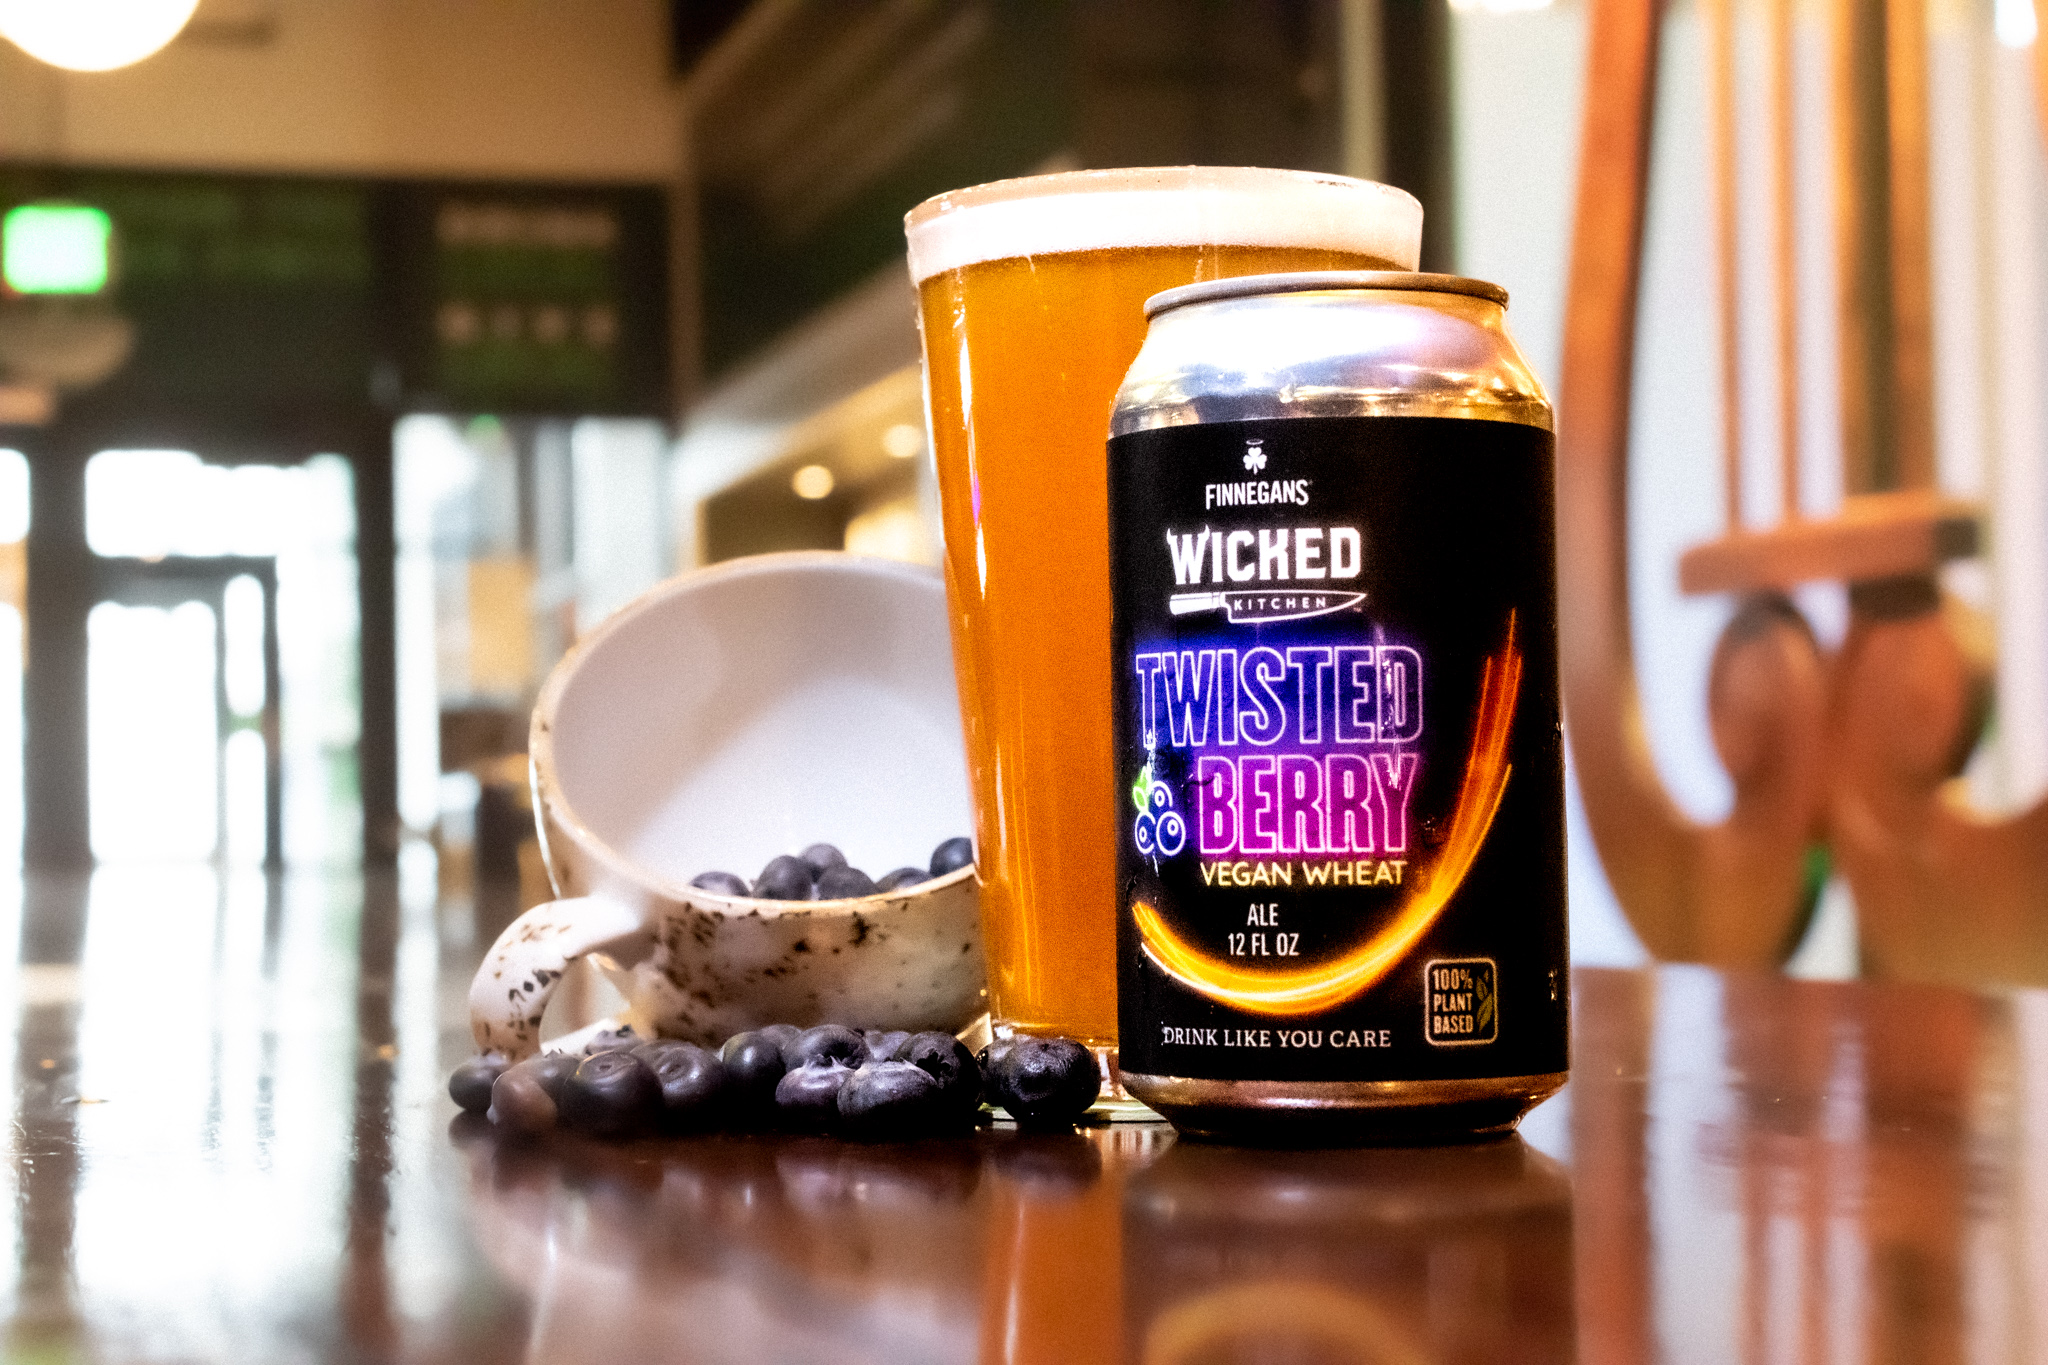 Wicked Twisted Berry with berries